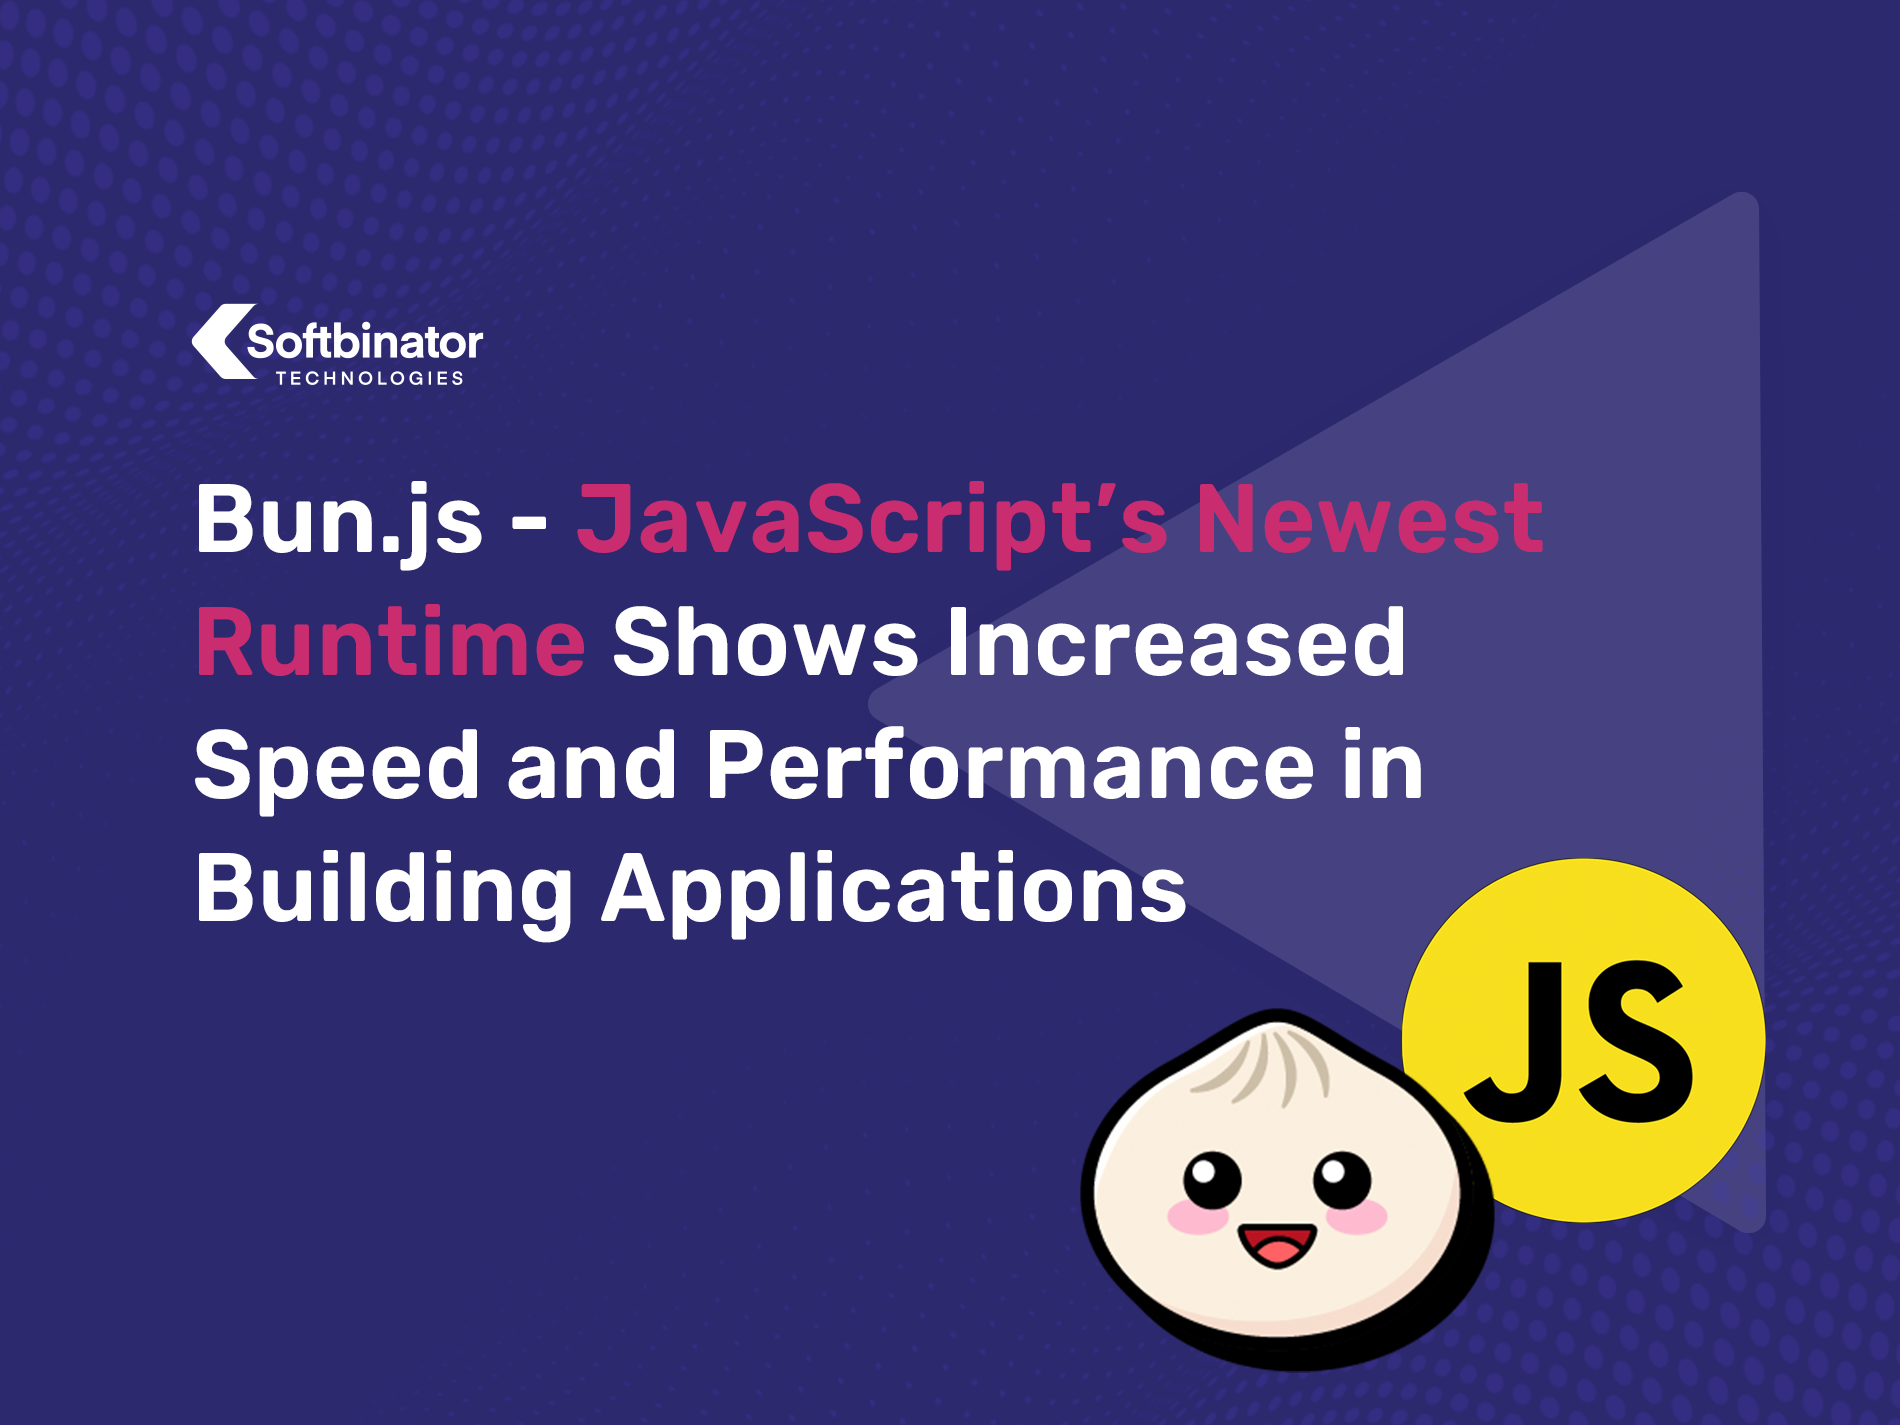 Bun.js - JavaScript’s Newest Runtime Shows Increased Speed and Performance in Building Applications